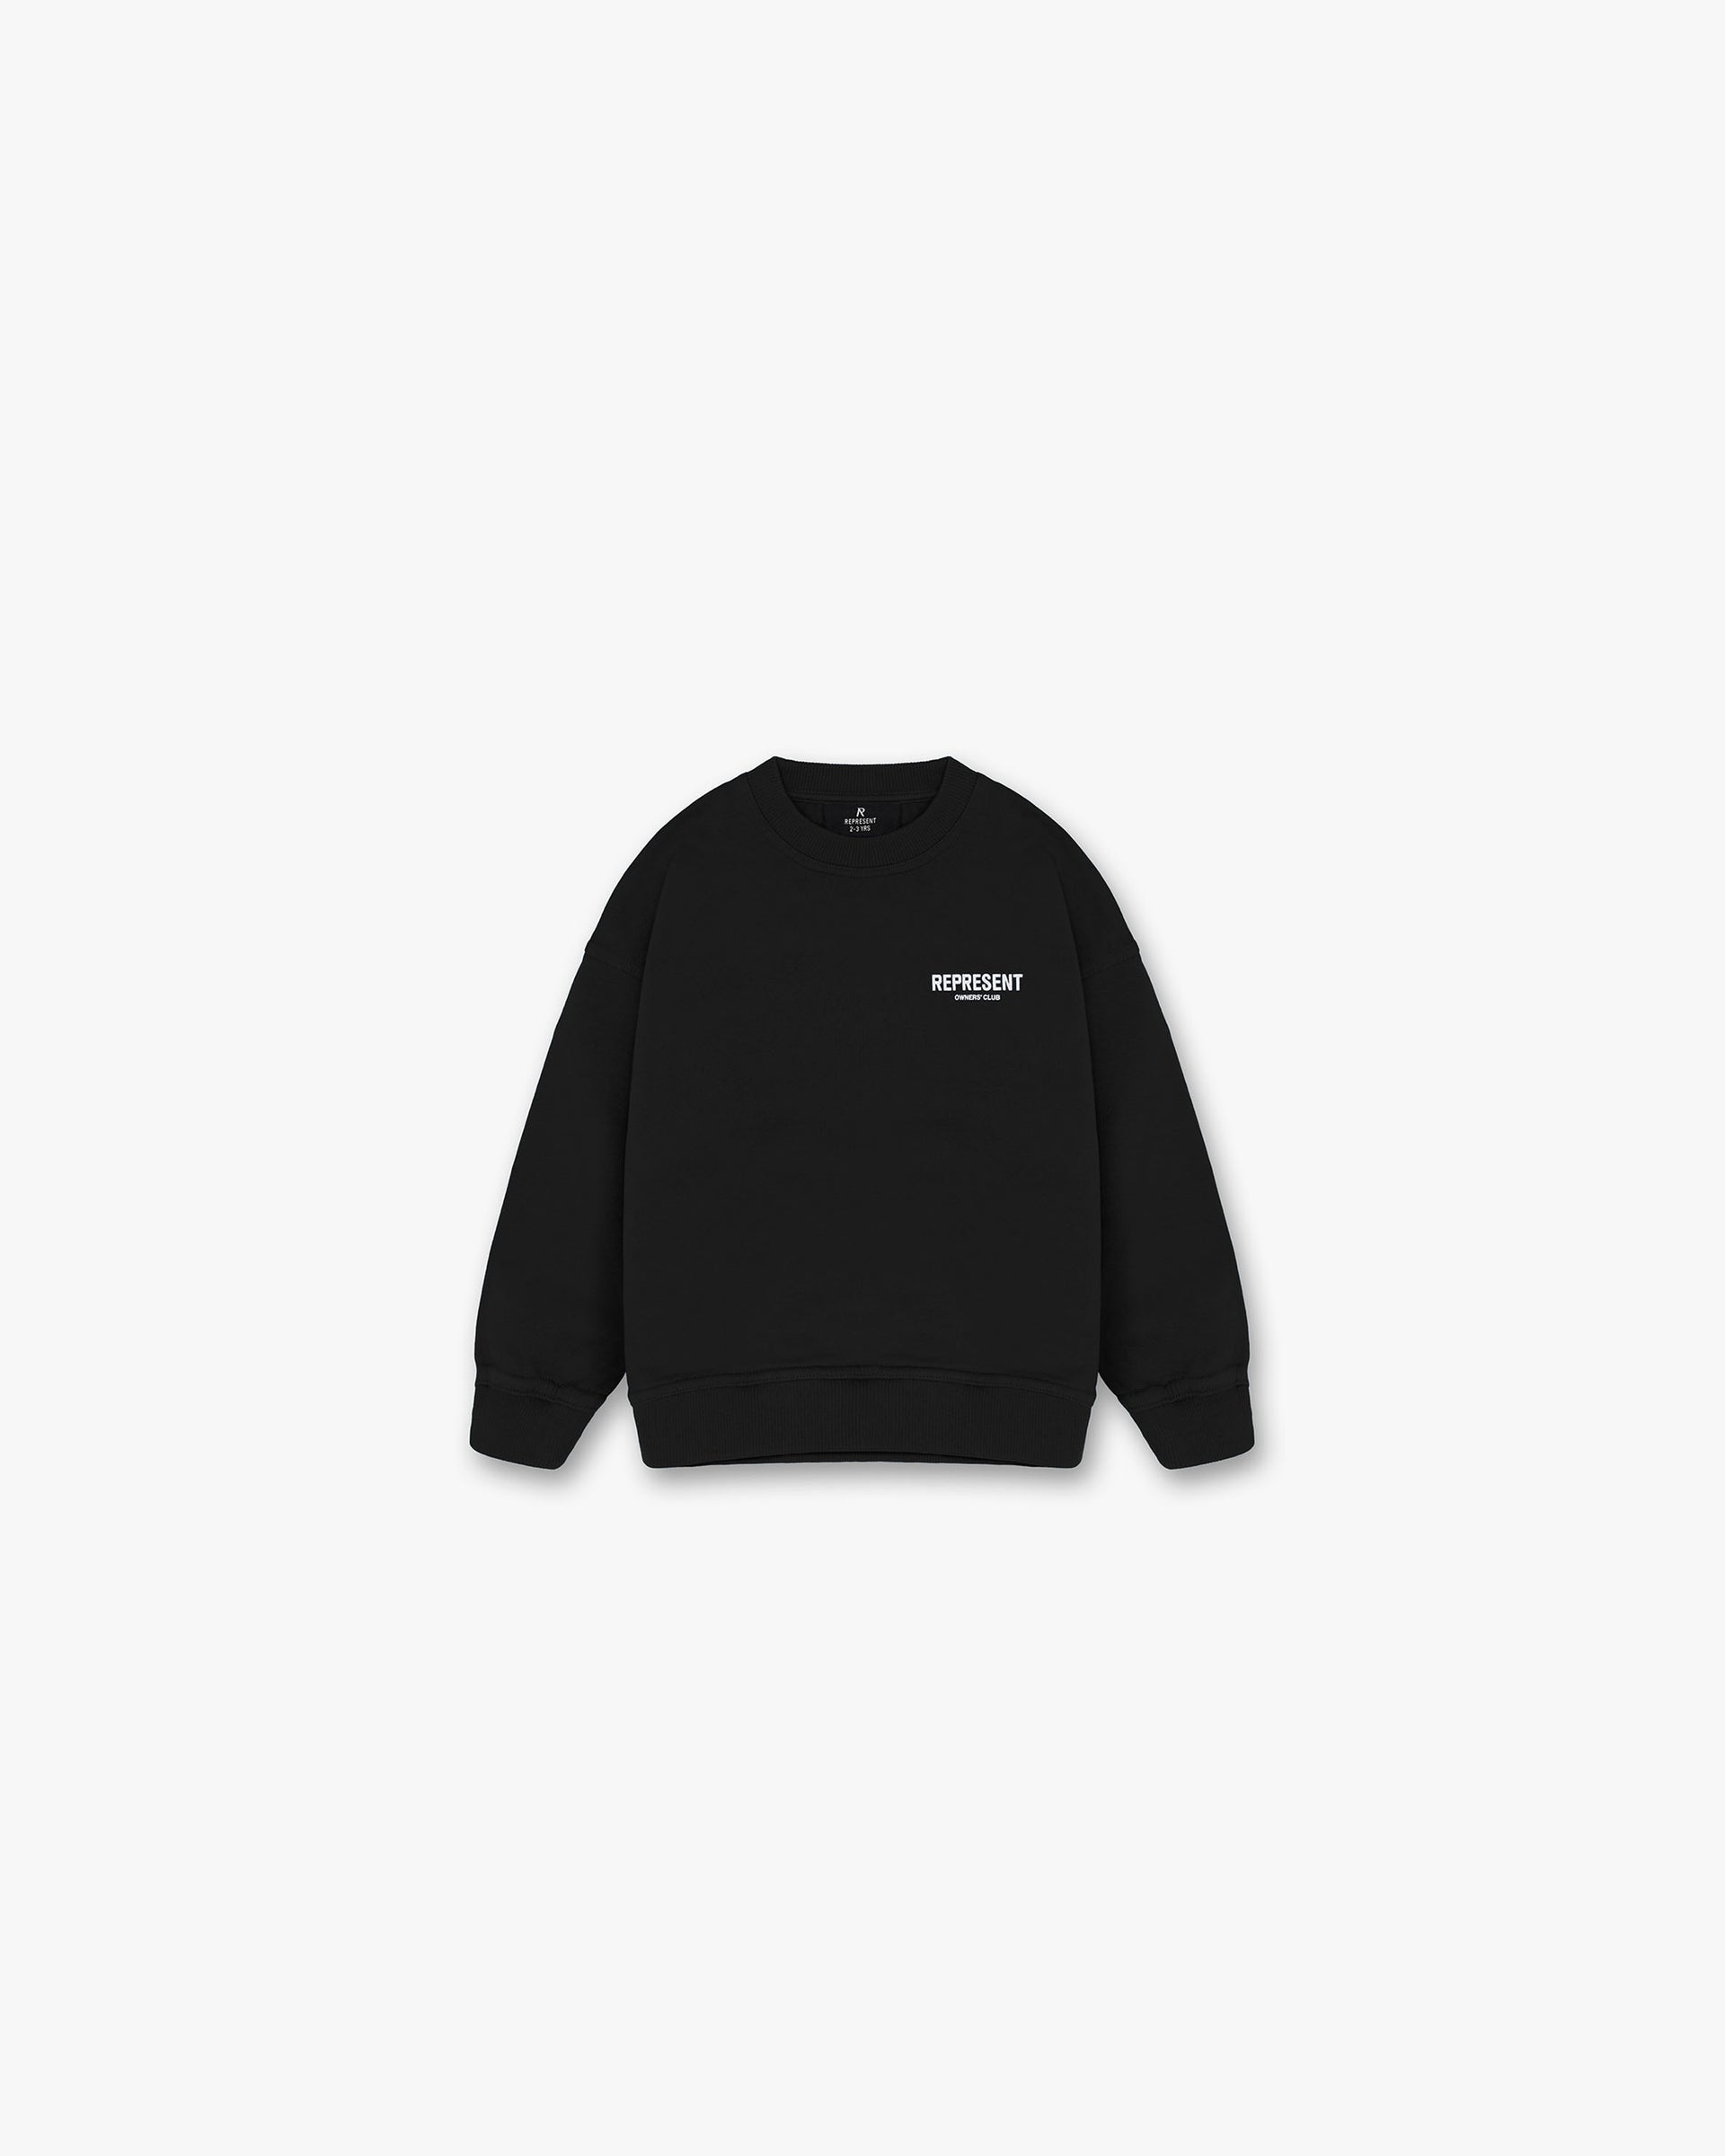 Represent Mini Owners Club Sweater | Black Sweaters Owners Club | Represent Clo